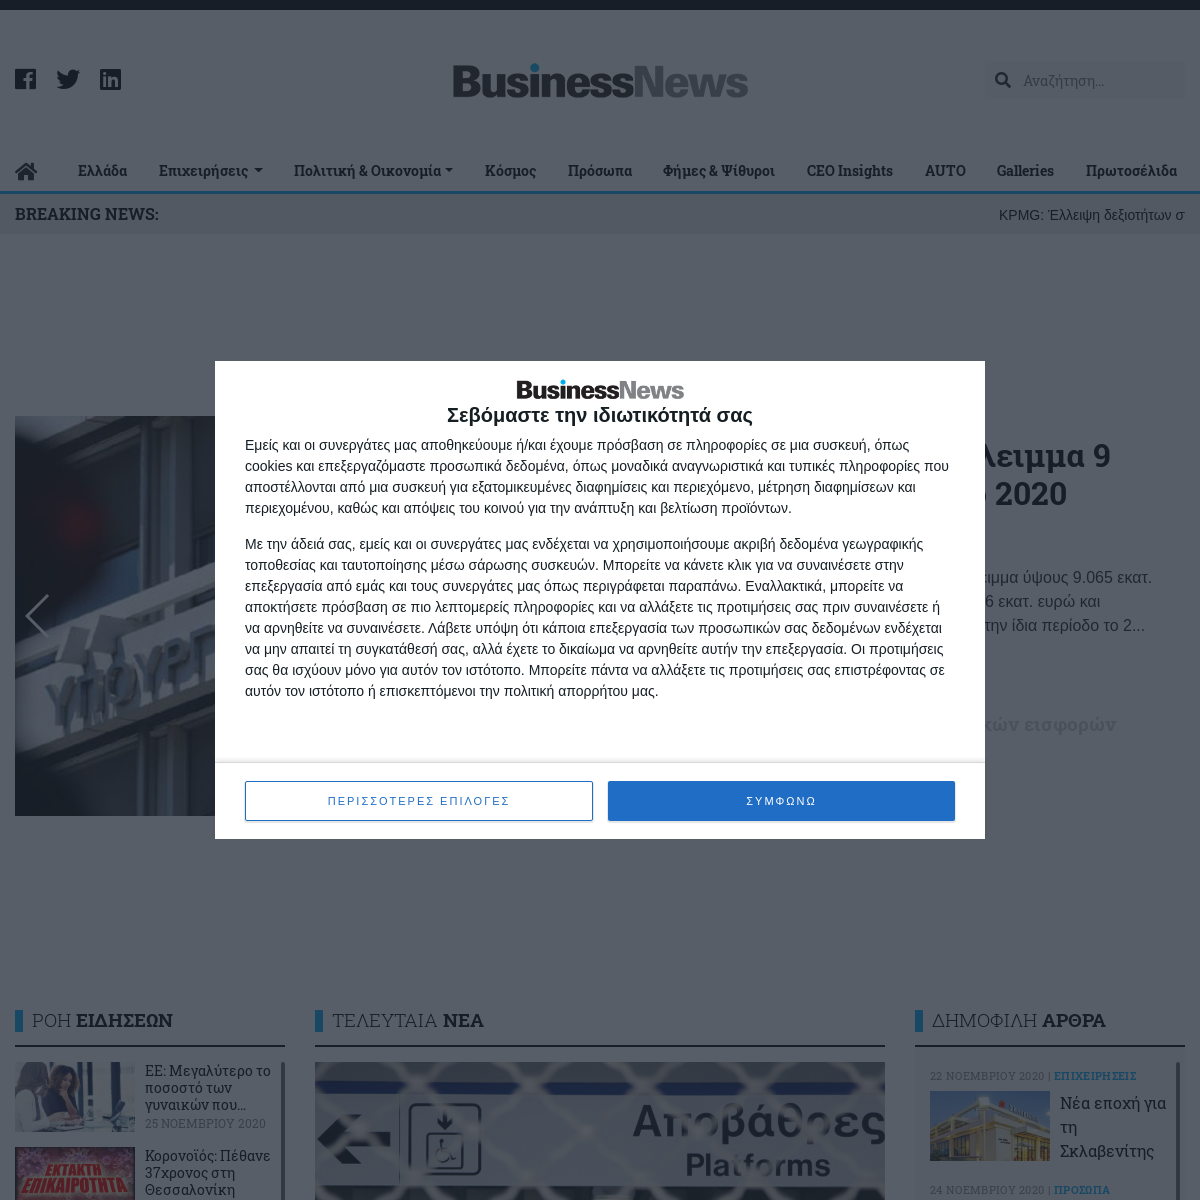 A complete backup of businessnews.gr